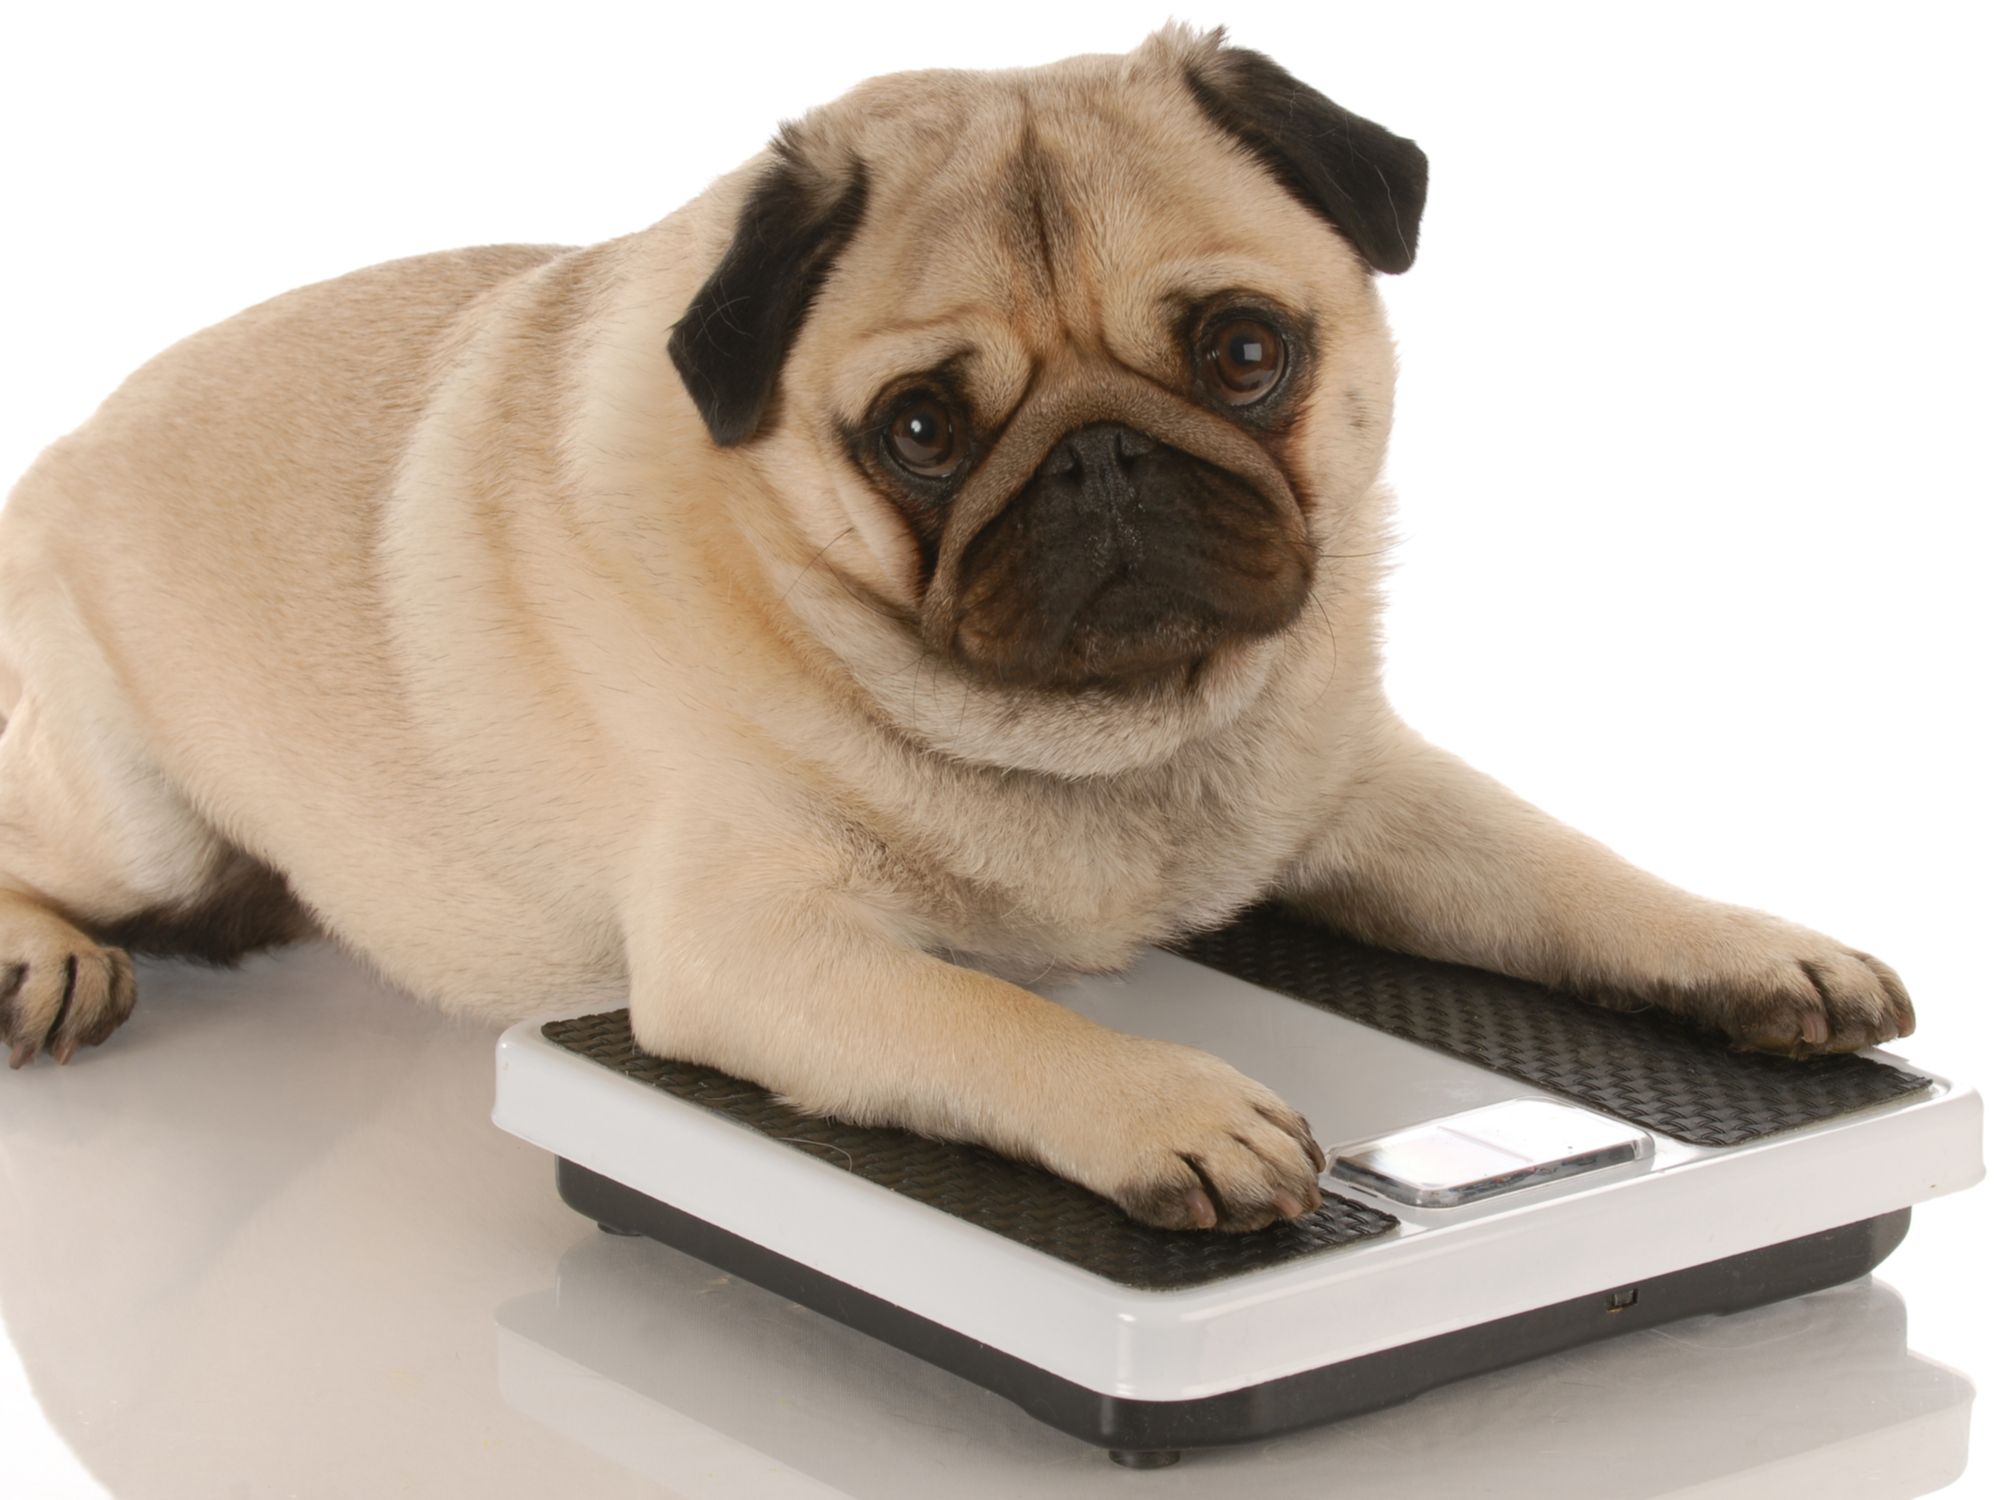 How Can I Tell If My Pet Is Overweight?